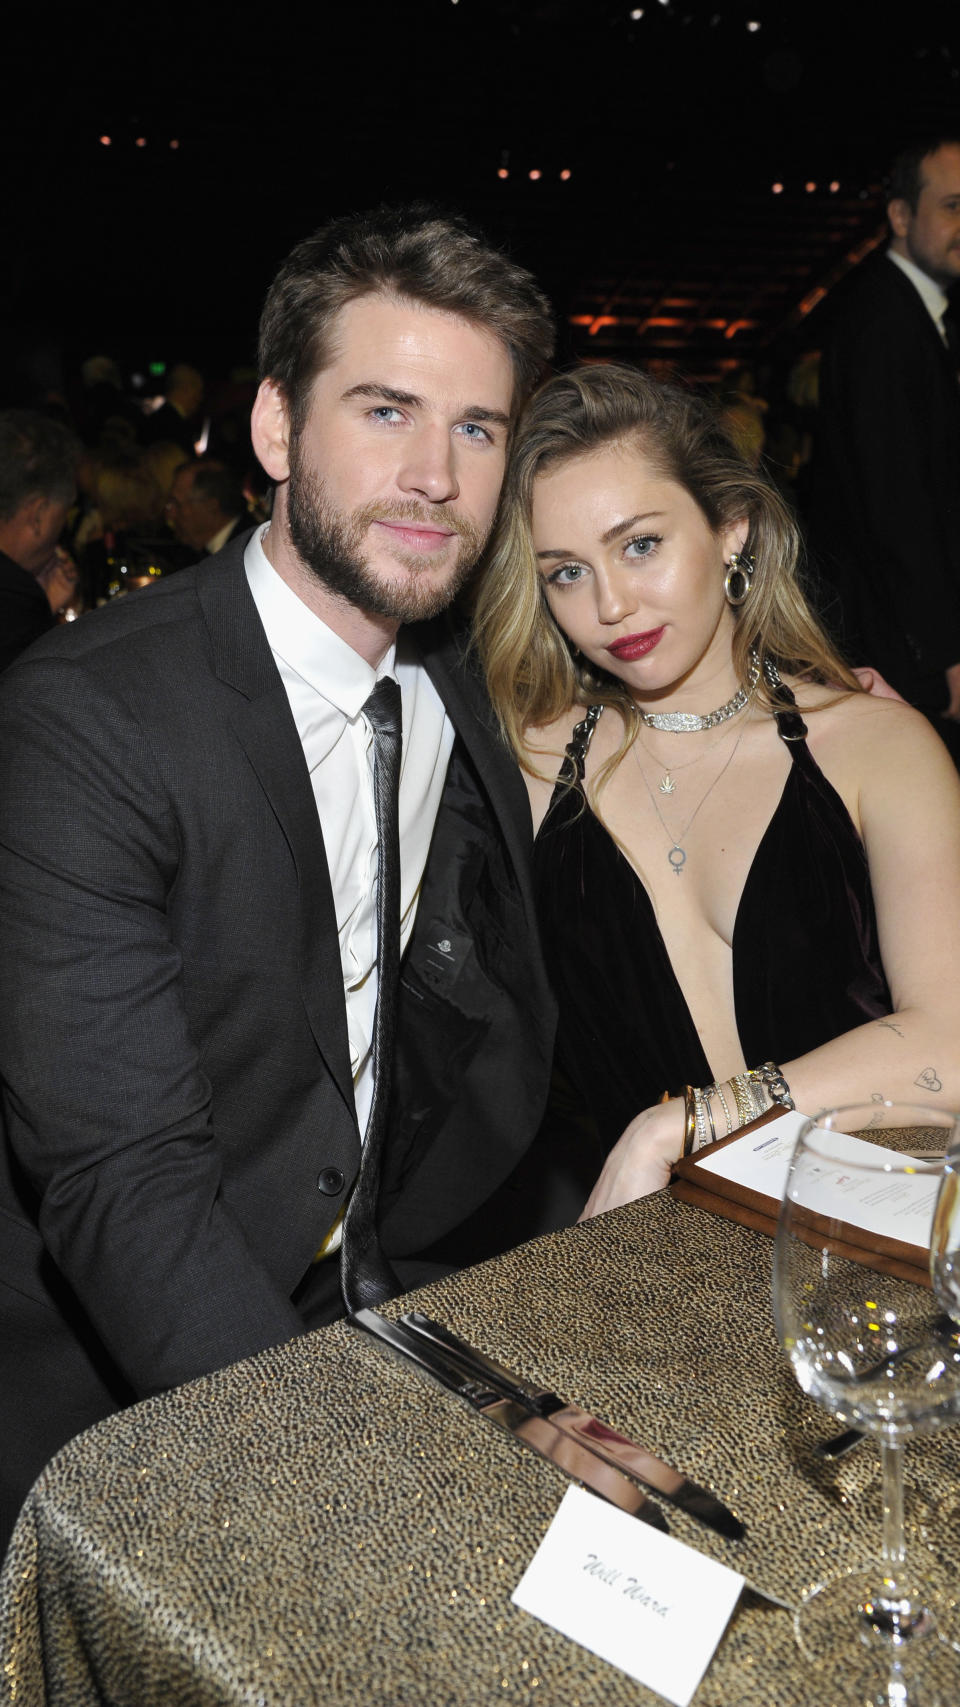  Miley and Liam